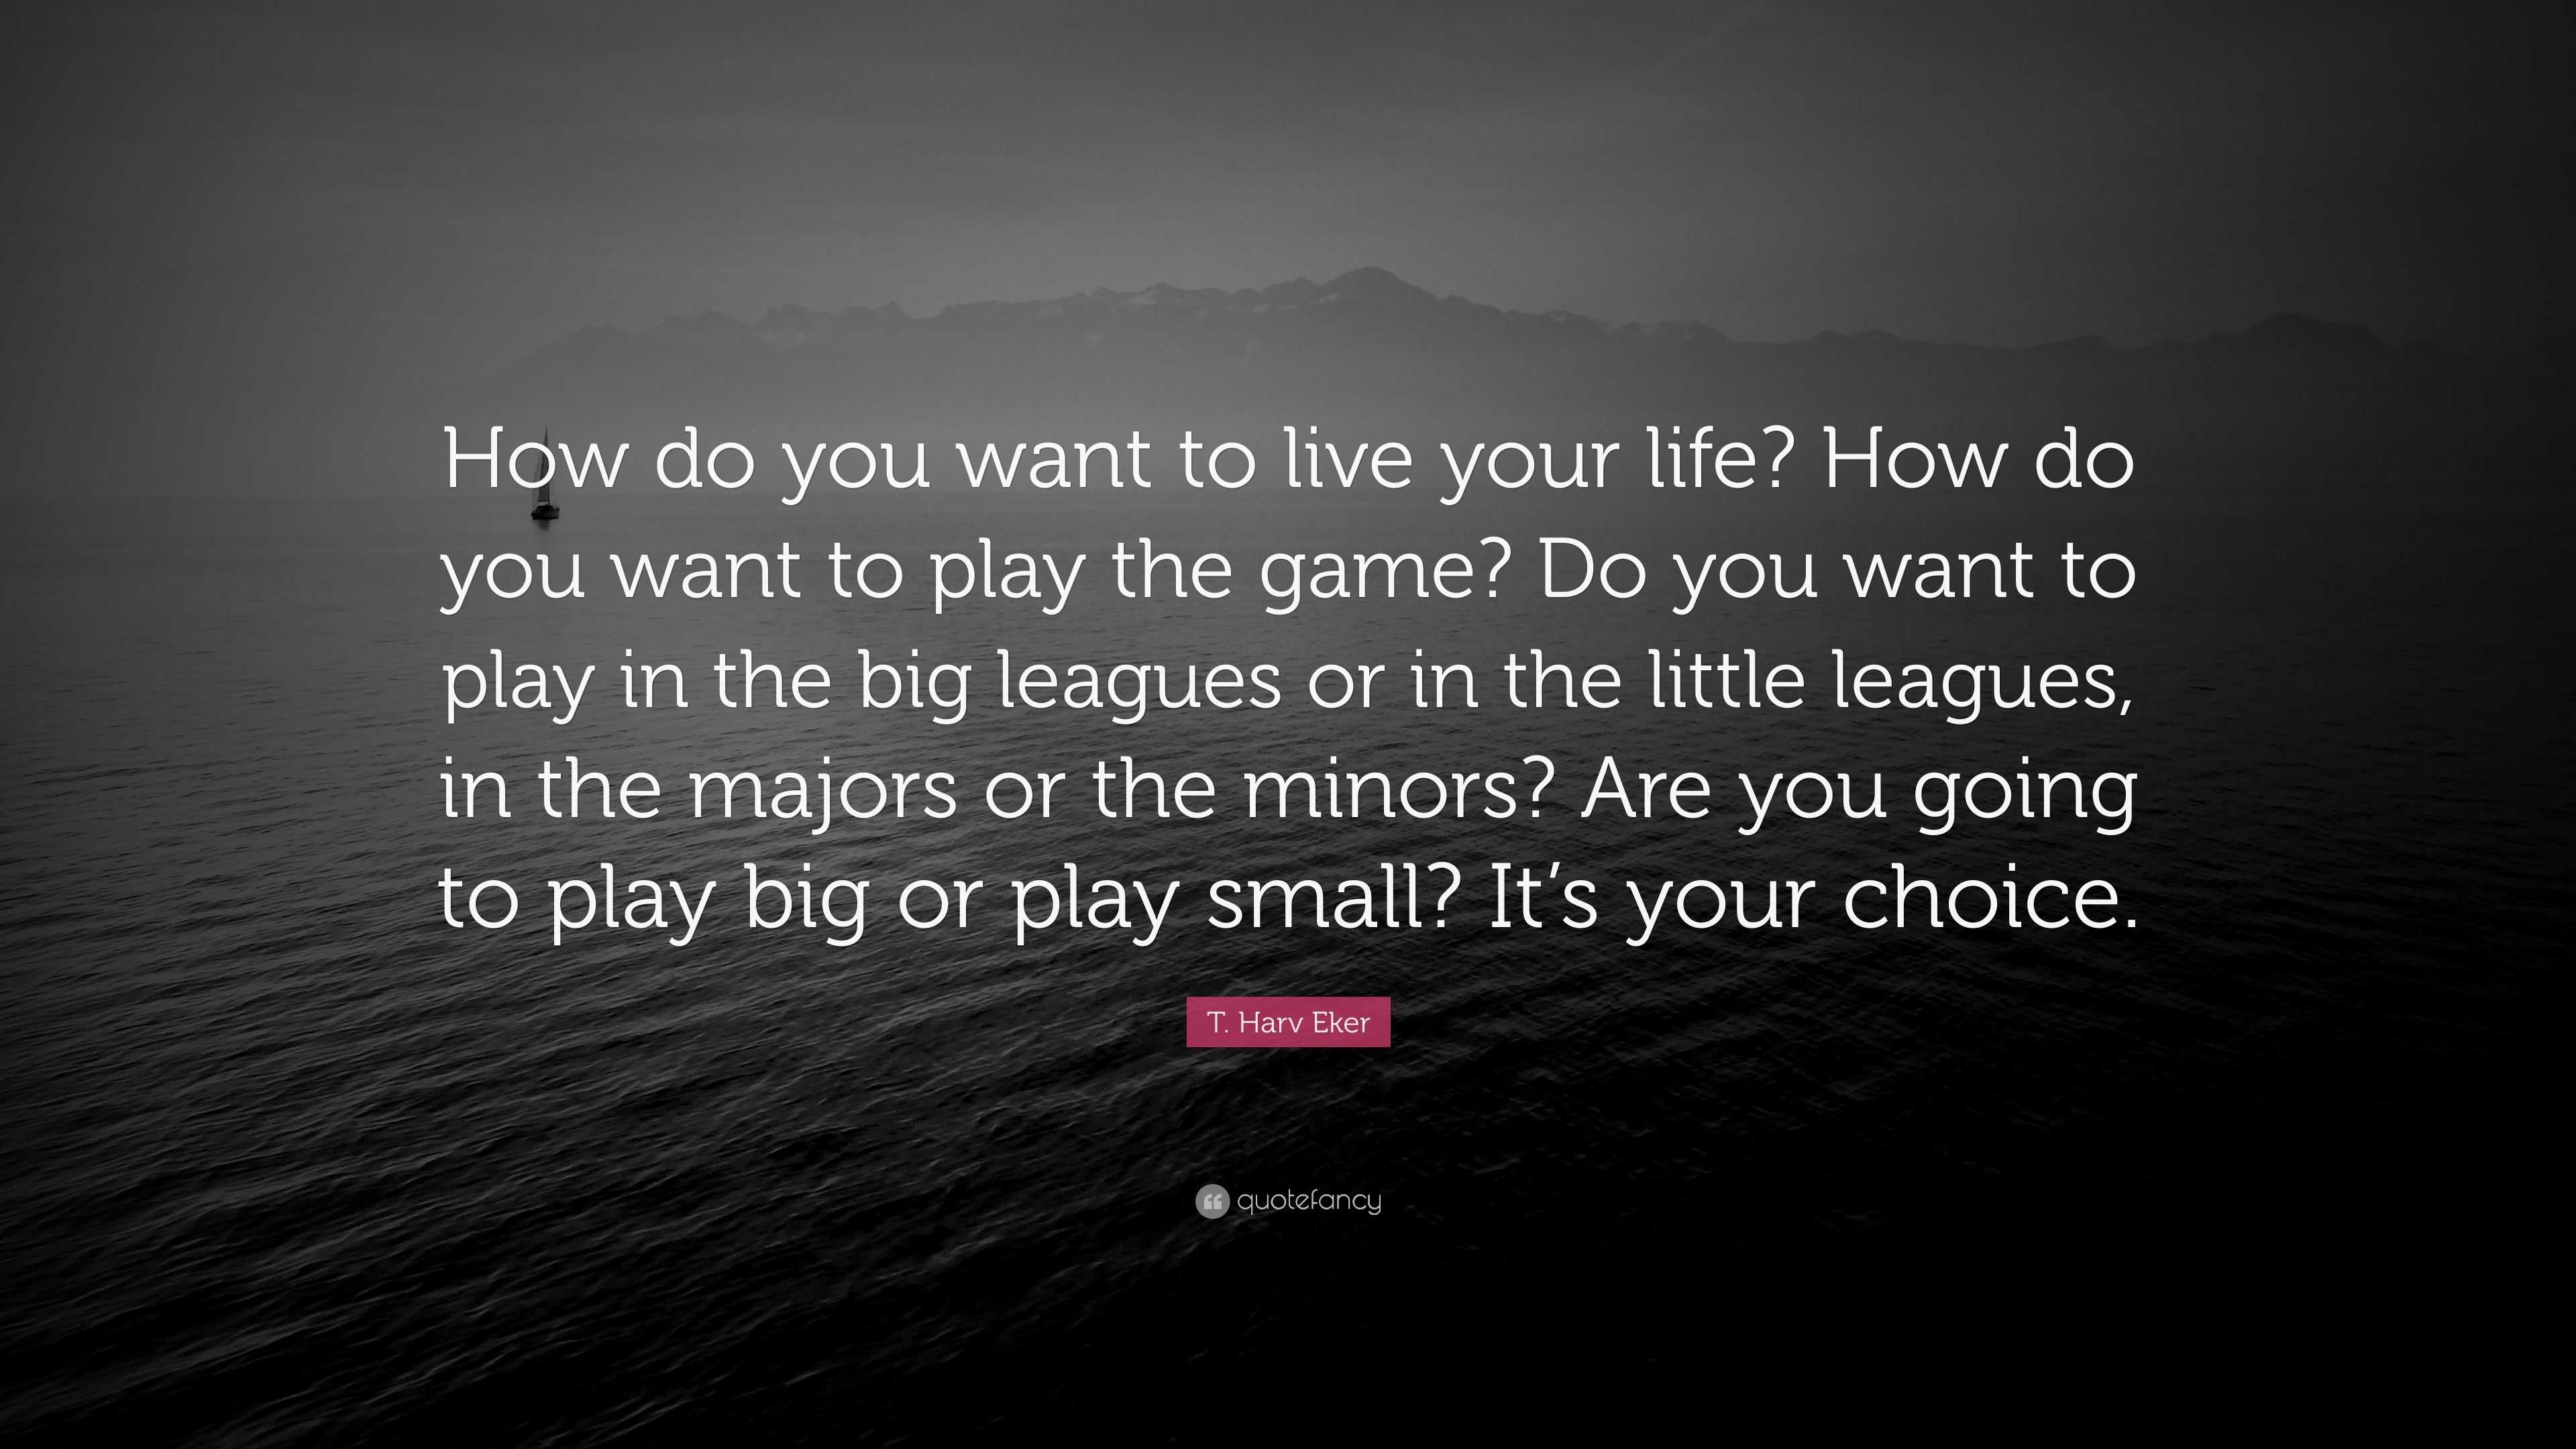 T Harv Eker Quote “How do you want to live your life